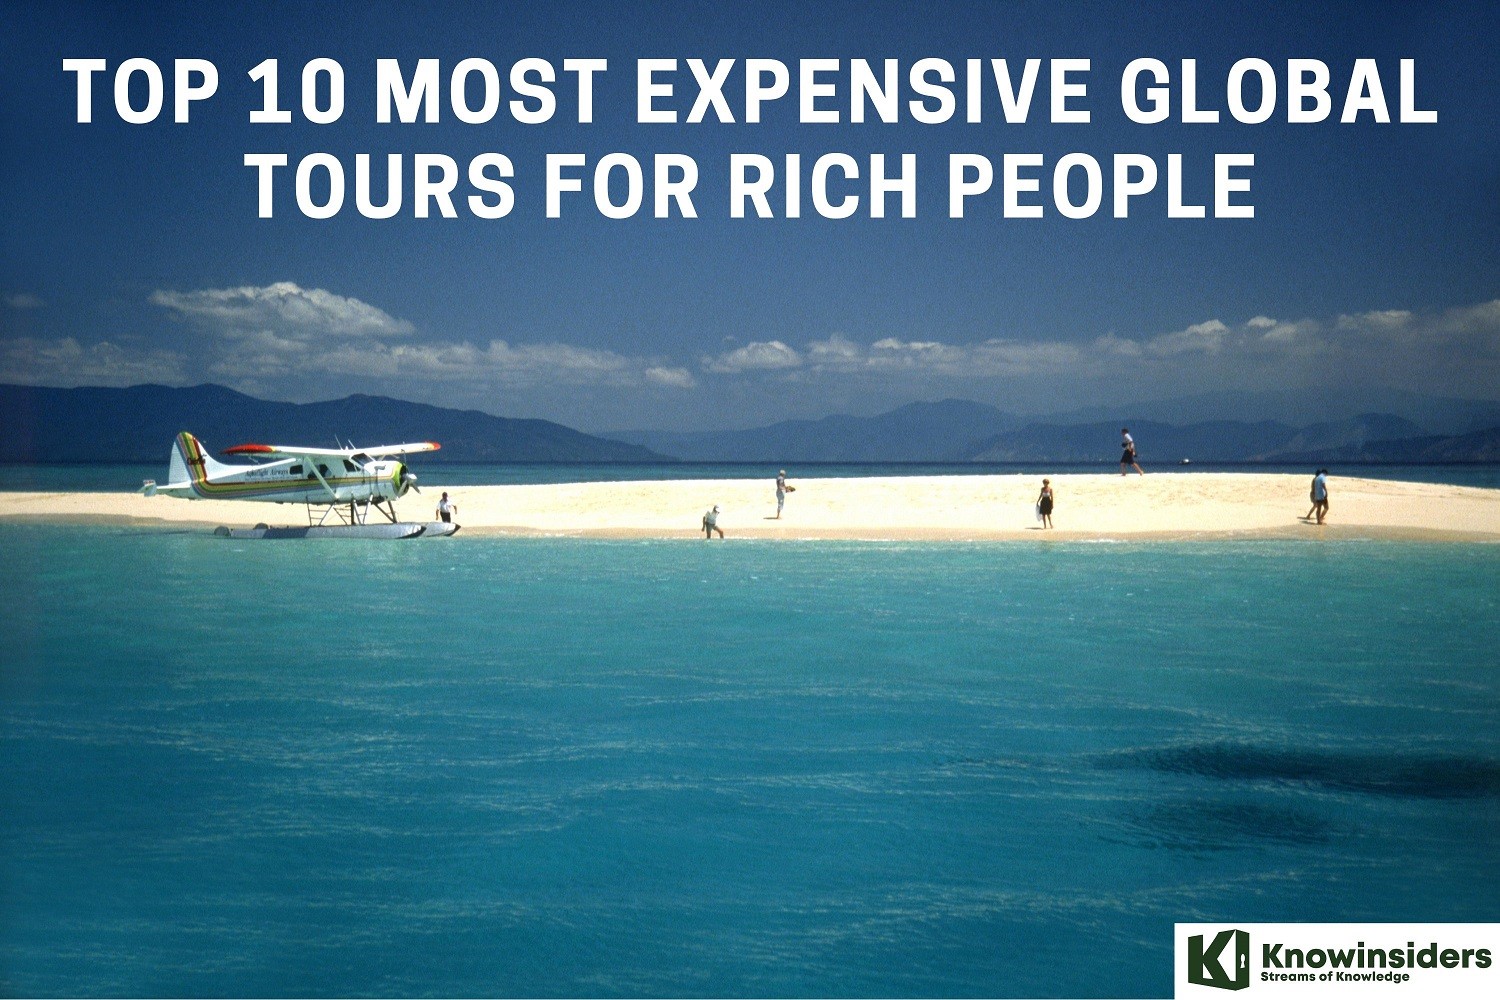 Top 10 Most Expensive Global Tours for Rich People